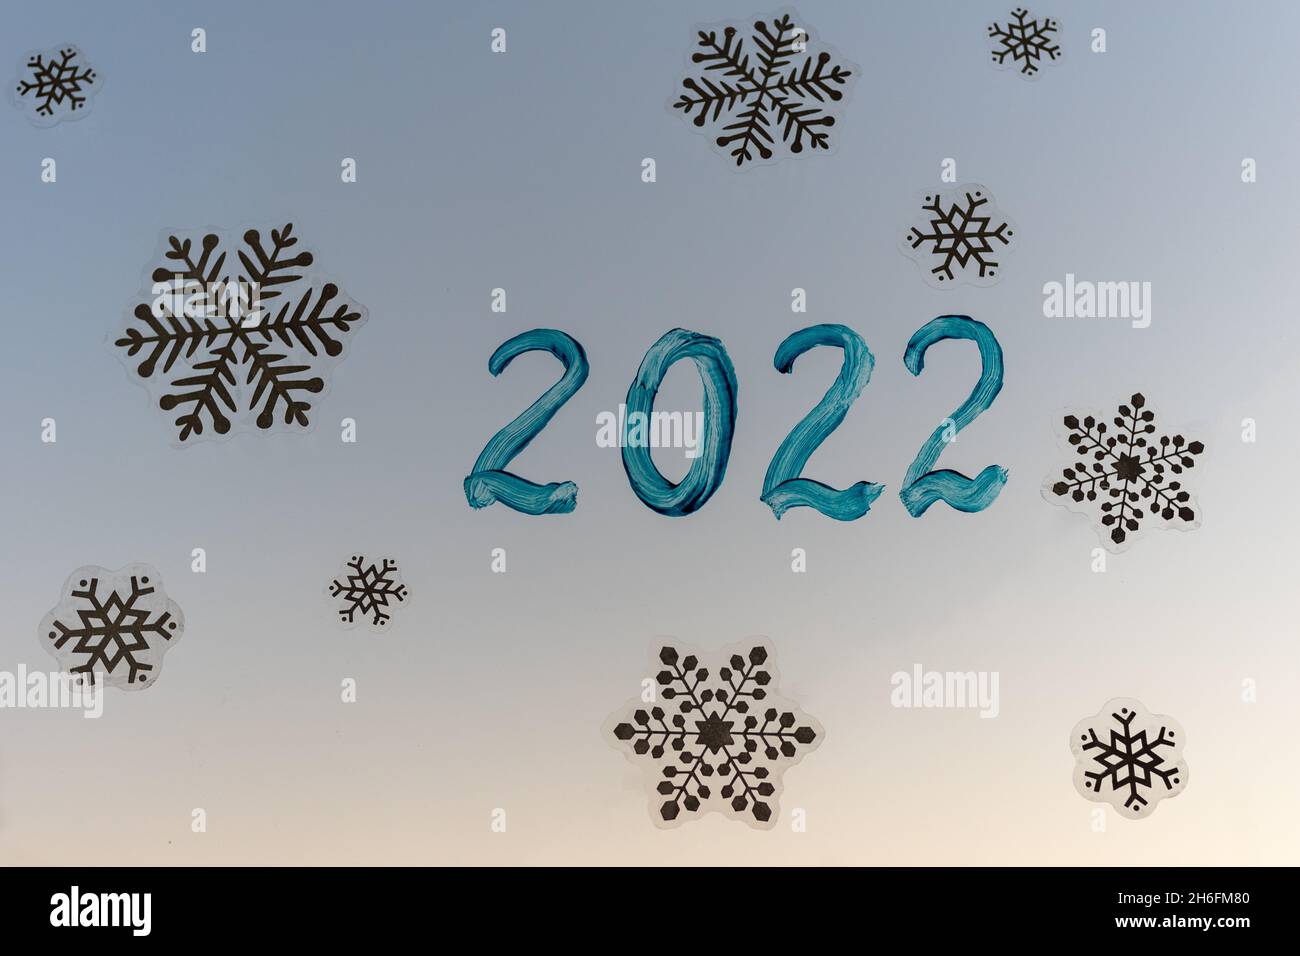 Christmas home window decoration with white snowflakes stickers and handwritten inscription 2022 in blue paint against the setting sun. Snowflake patt Stock Photo